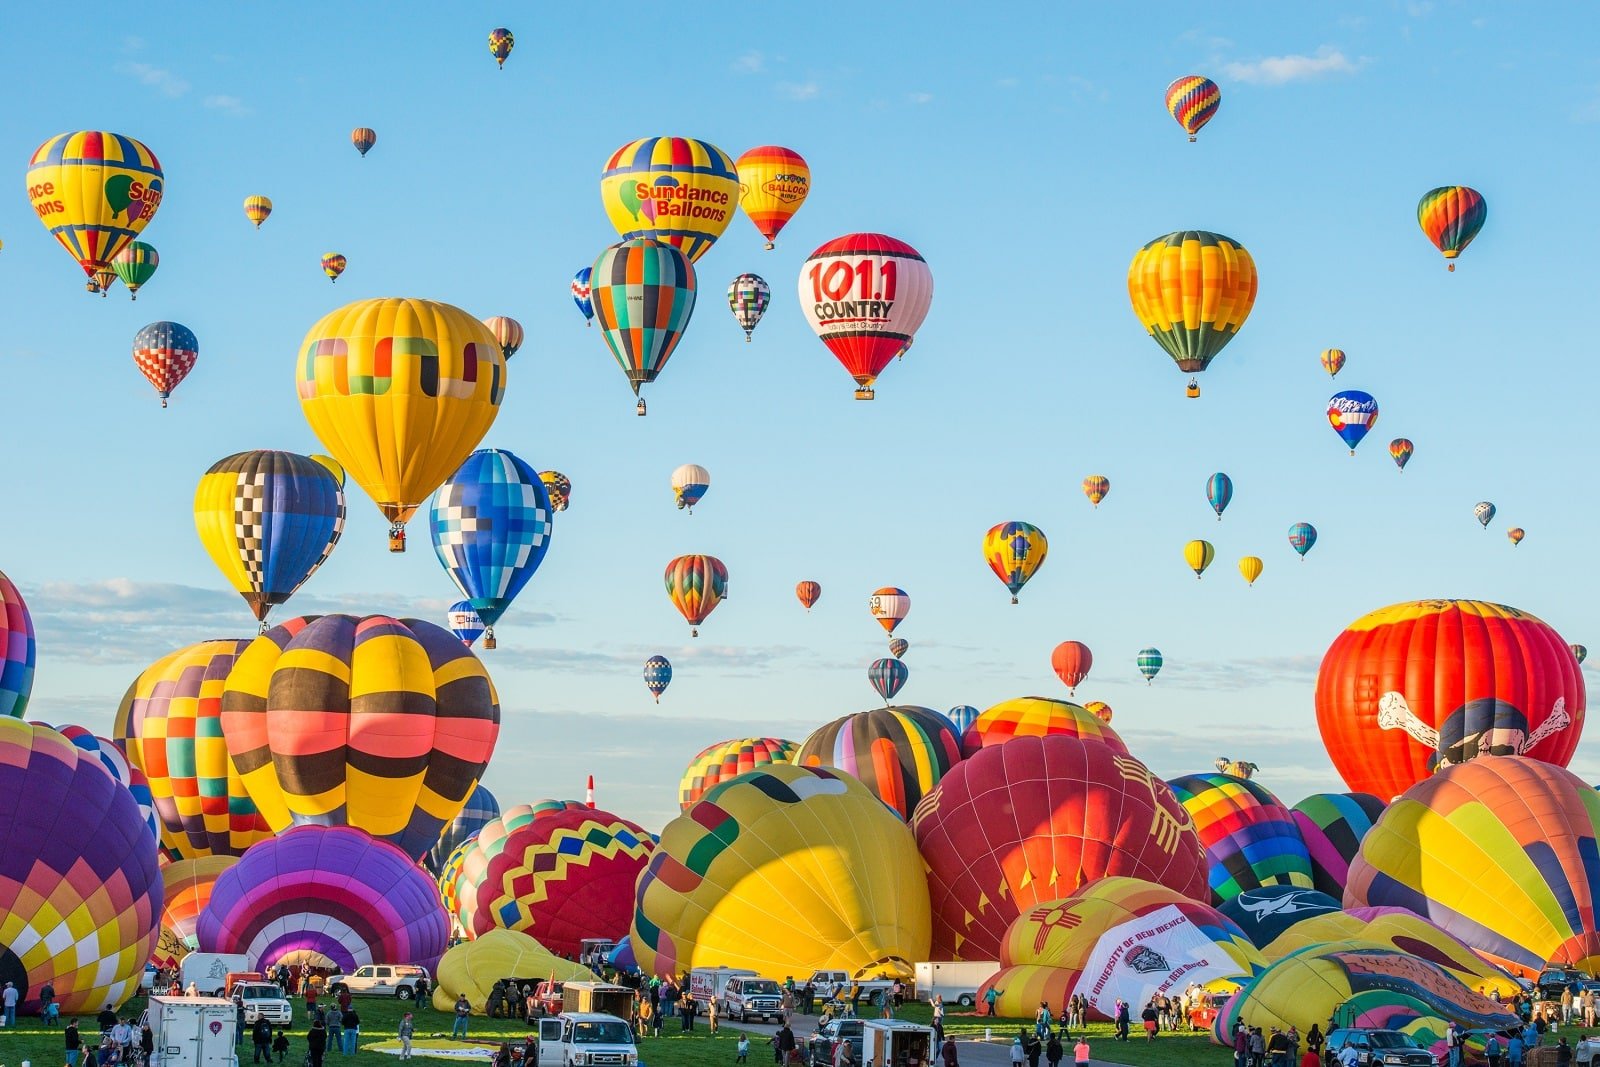 <p><span>Witness the enchanting spectacle of the Albuquerque International Balloon Fiesta. Hundreds of colorful hot air balloons fill the sky in this world-renowned event. The festival supports local businesses and significantly impacts the local economy. The event includes music, food vendors, and cultural exhibitions, celebrating New Mexico’s vibrant community.</span></p> <p><b>Insider’s Tip: </b><span>Participate in the early morning mass ascensions for an unforgettable experience. </span></p> <p><b>Date: </b><span>Held in early October. Albuquerque, New Mexico’s sky fills with hundreds of balloons, offering a magical experience. The festival is an important event for local vendors and craftspeople.</span></p> <p><b>How To Get There: </b><span>Fly to Albuquerque International Sunport and use local transport to reach the fiesta grounds.</span></p>